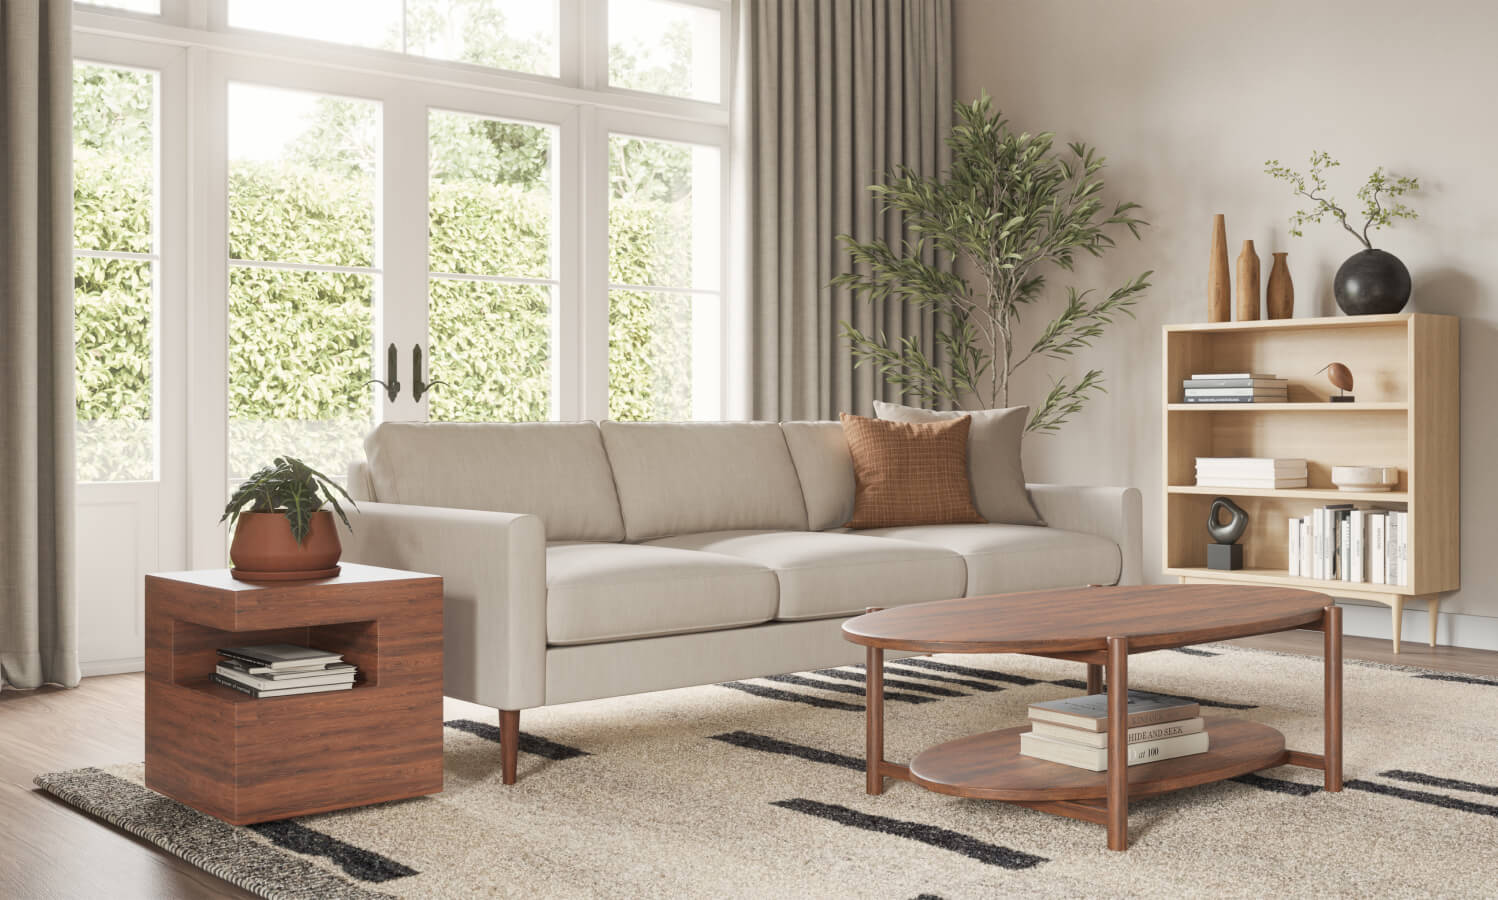 IRL: Shown in Maple wood with beige Lala Sofa